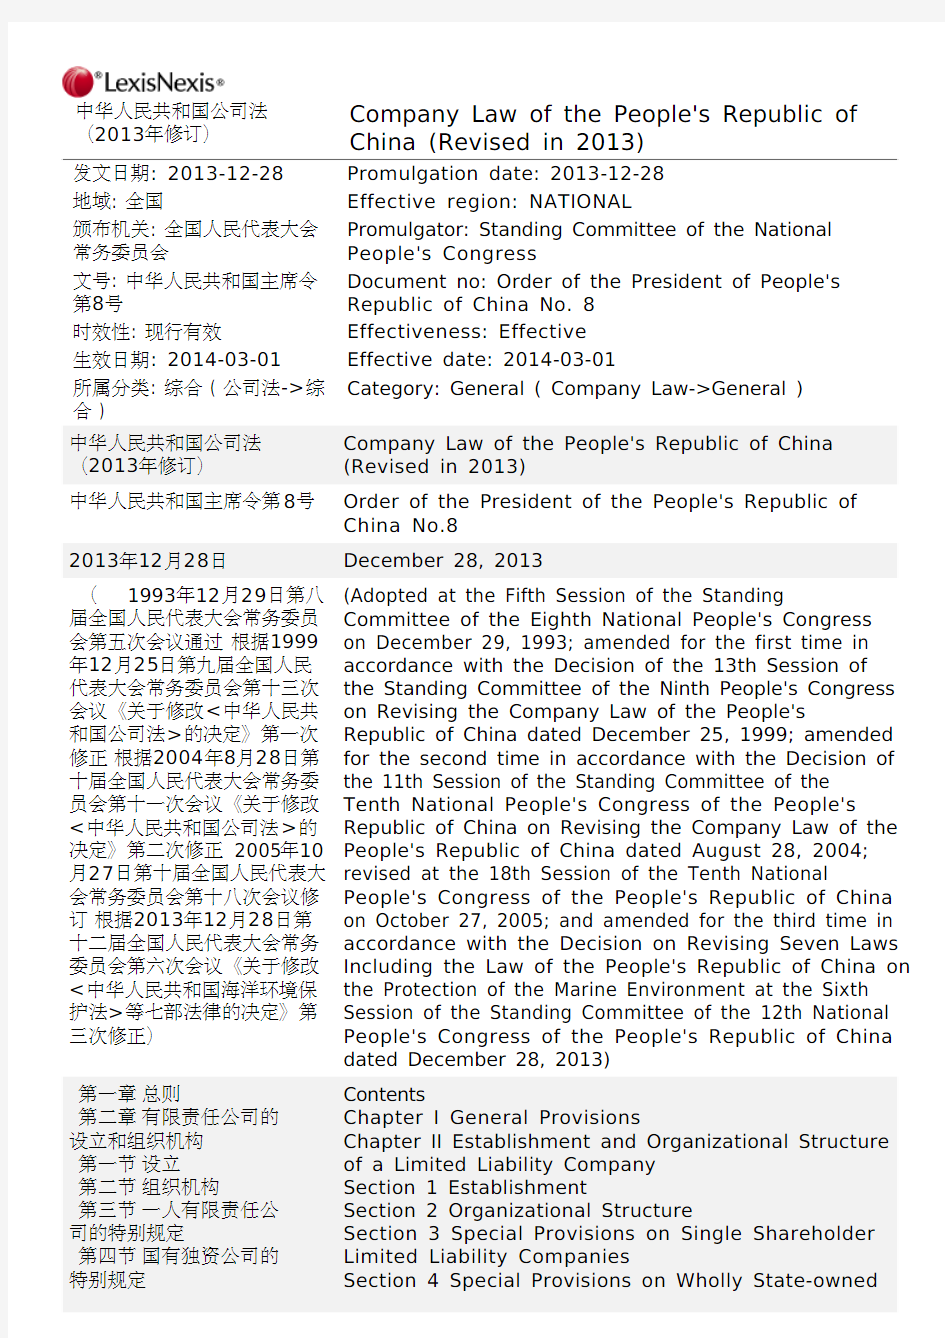 Company_Law_of_the_People's_Republic_of_China_(Revised_in_2013)-公司法